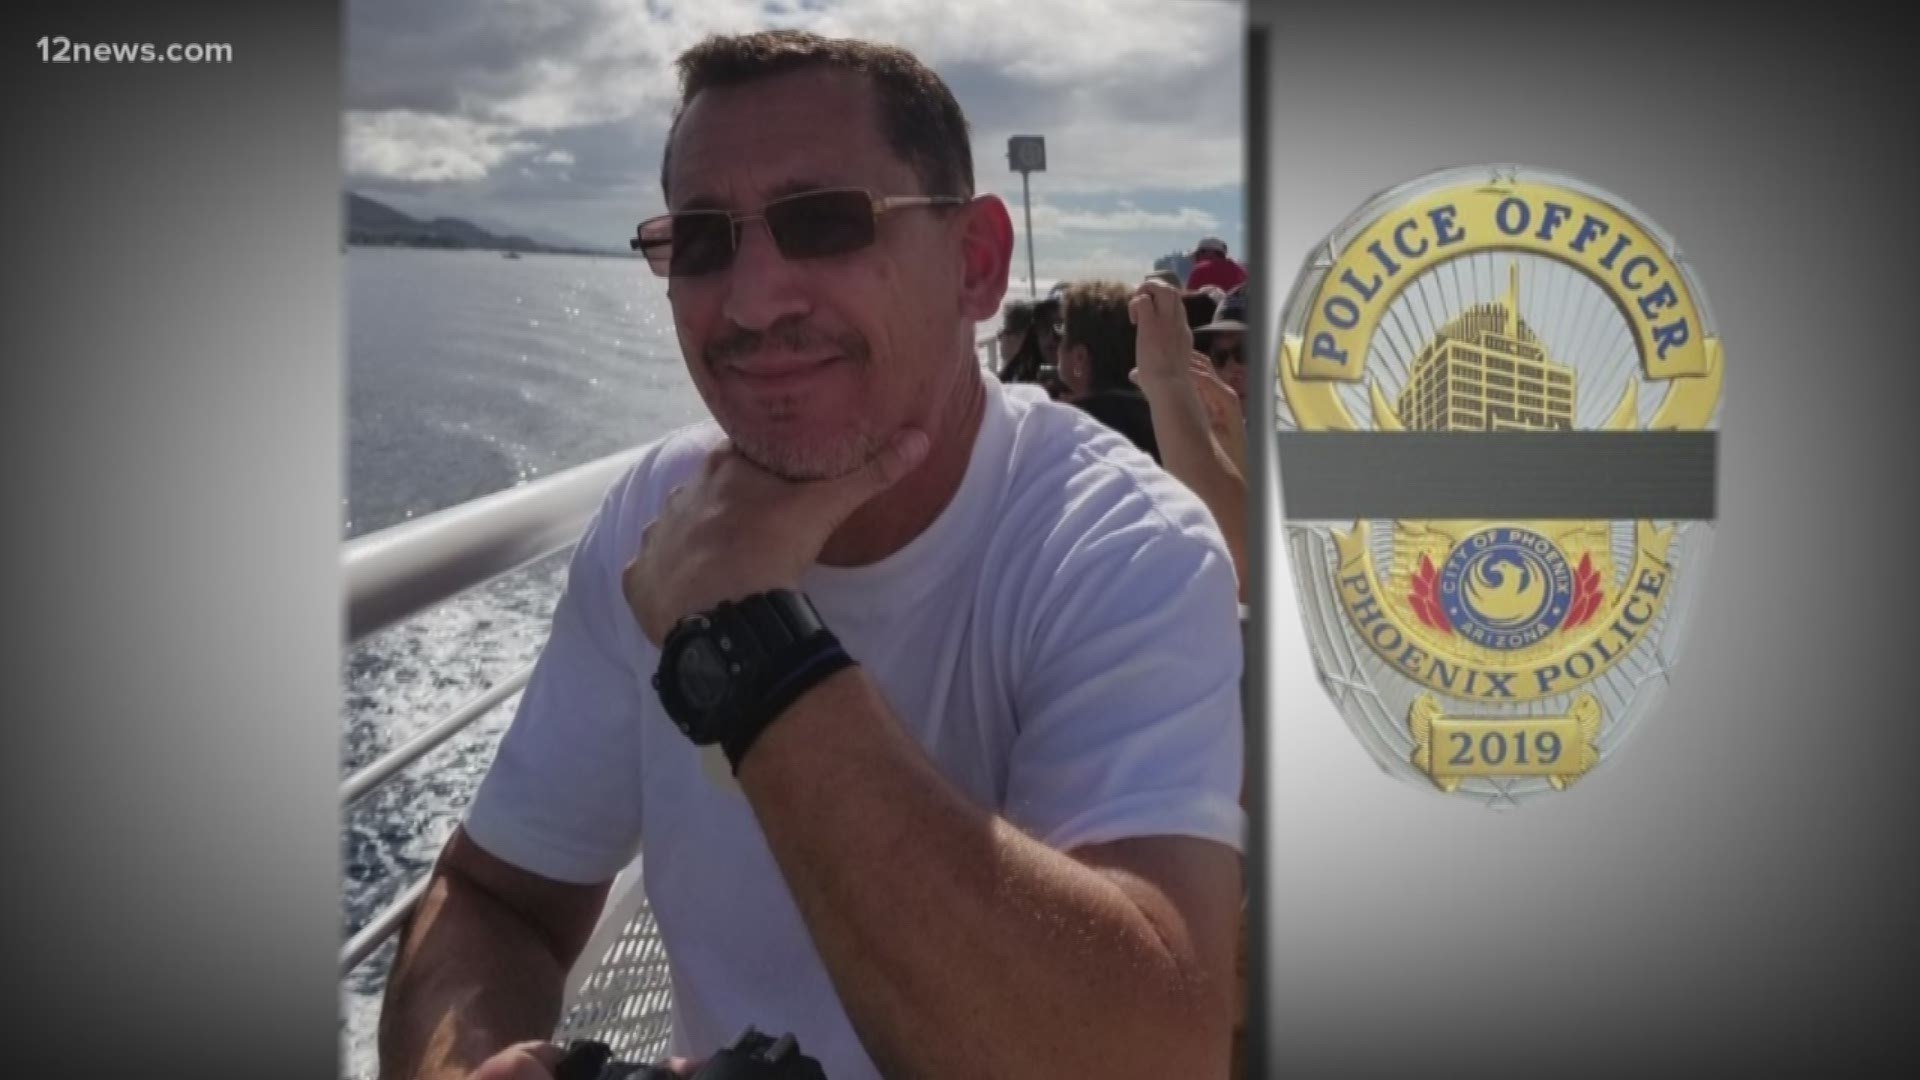 Phoenix police Officer Paul Rutherford was struck and killed Thursday morning while responding to a car accident. The 100 Club of Arizona is stepping in to help raise money for Officer Rutherford's family. If you would like to help you can donate to the Club's survivors fund by texting "Fallen" to 243725.